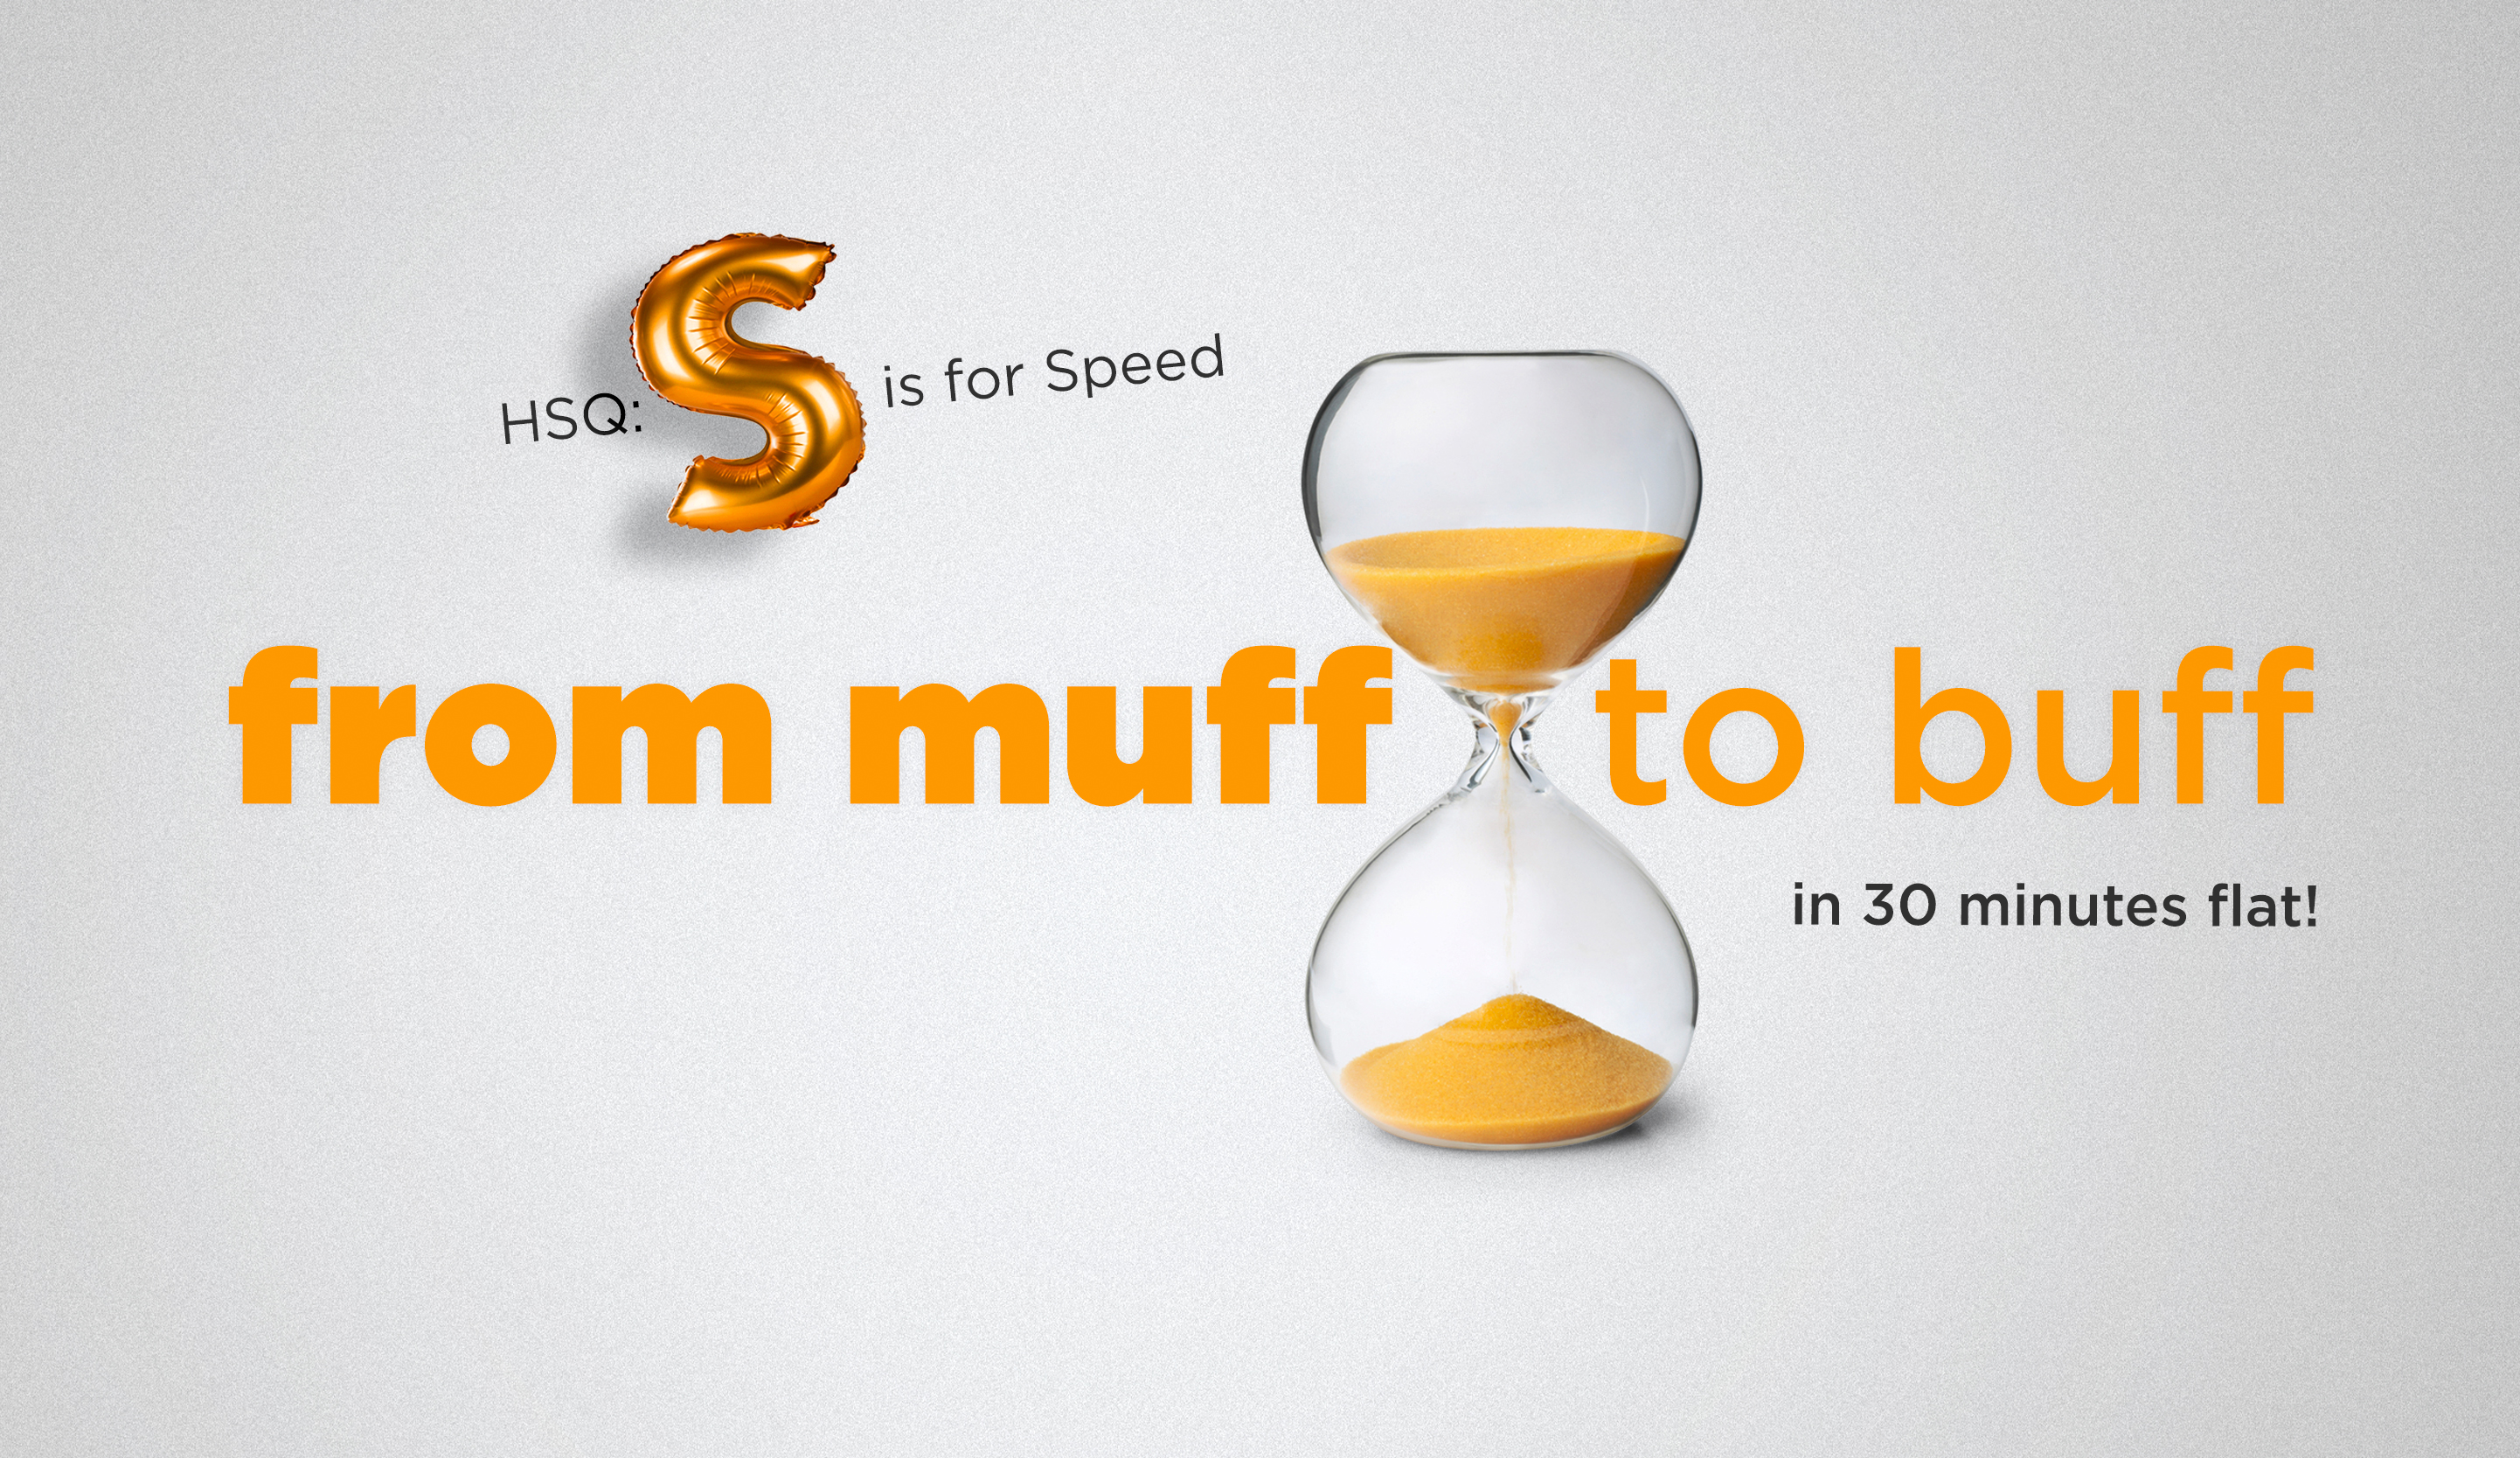 From muff to buff in 30 minutes flat!